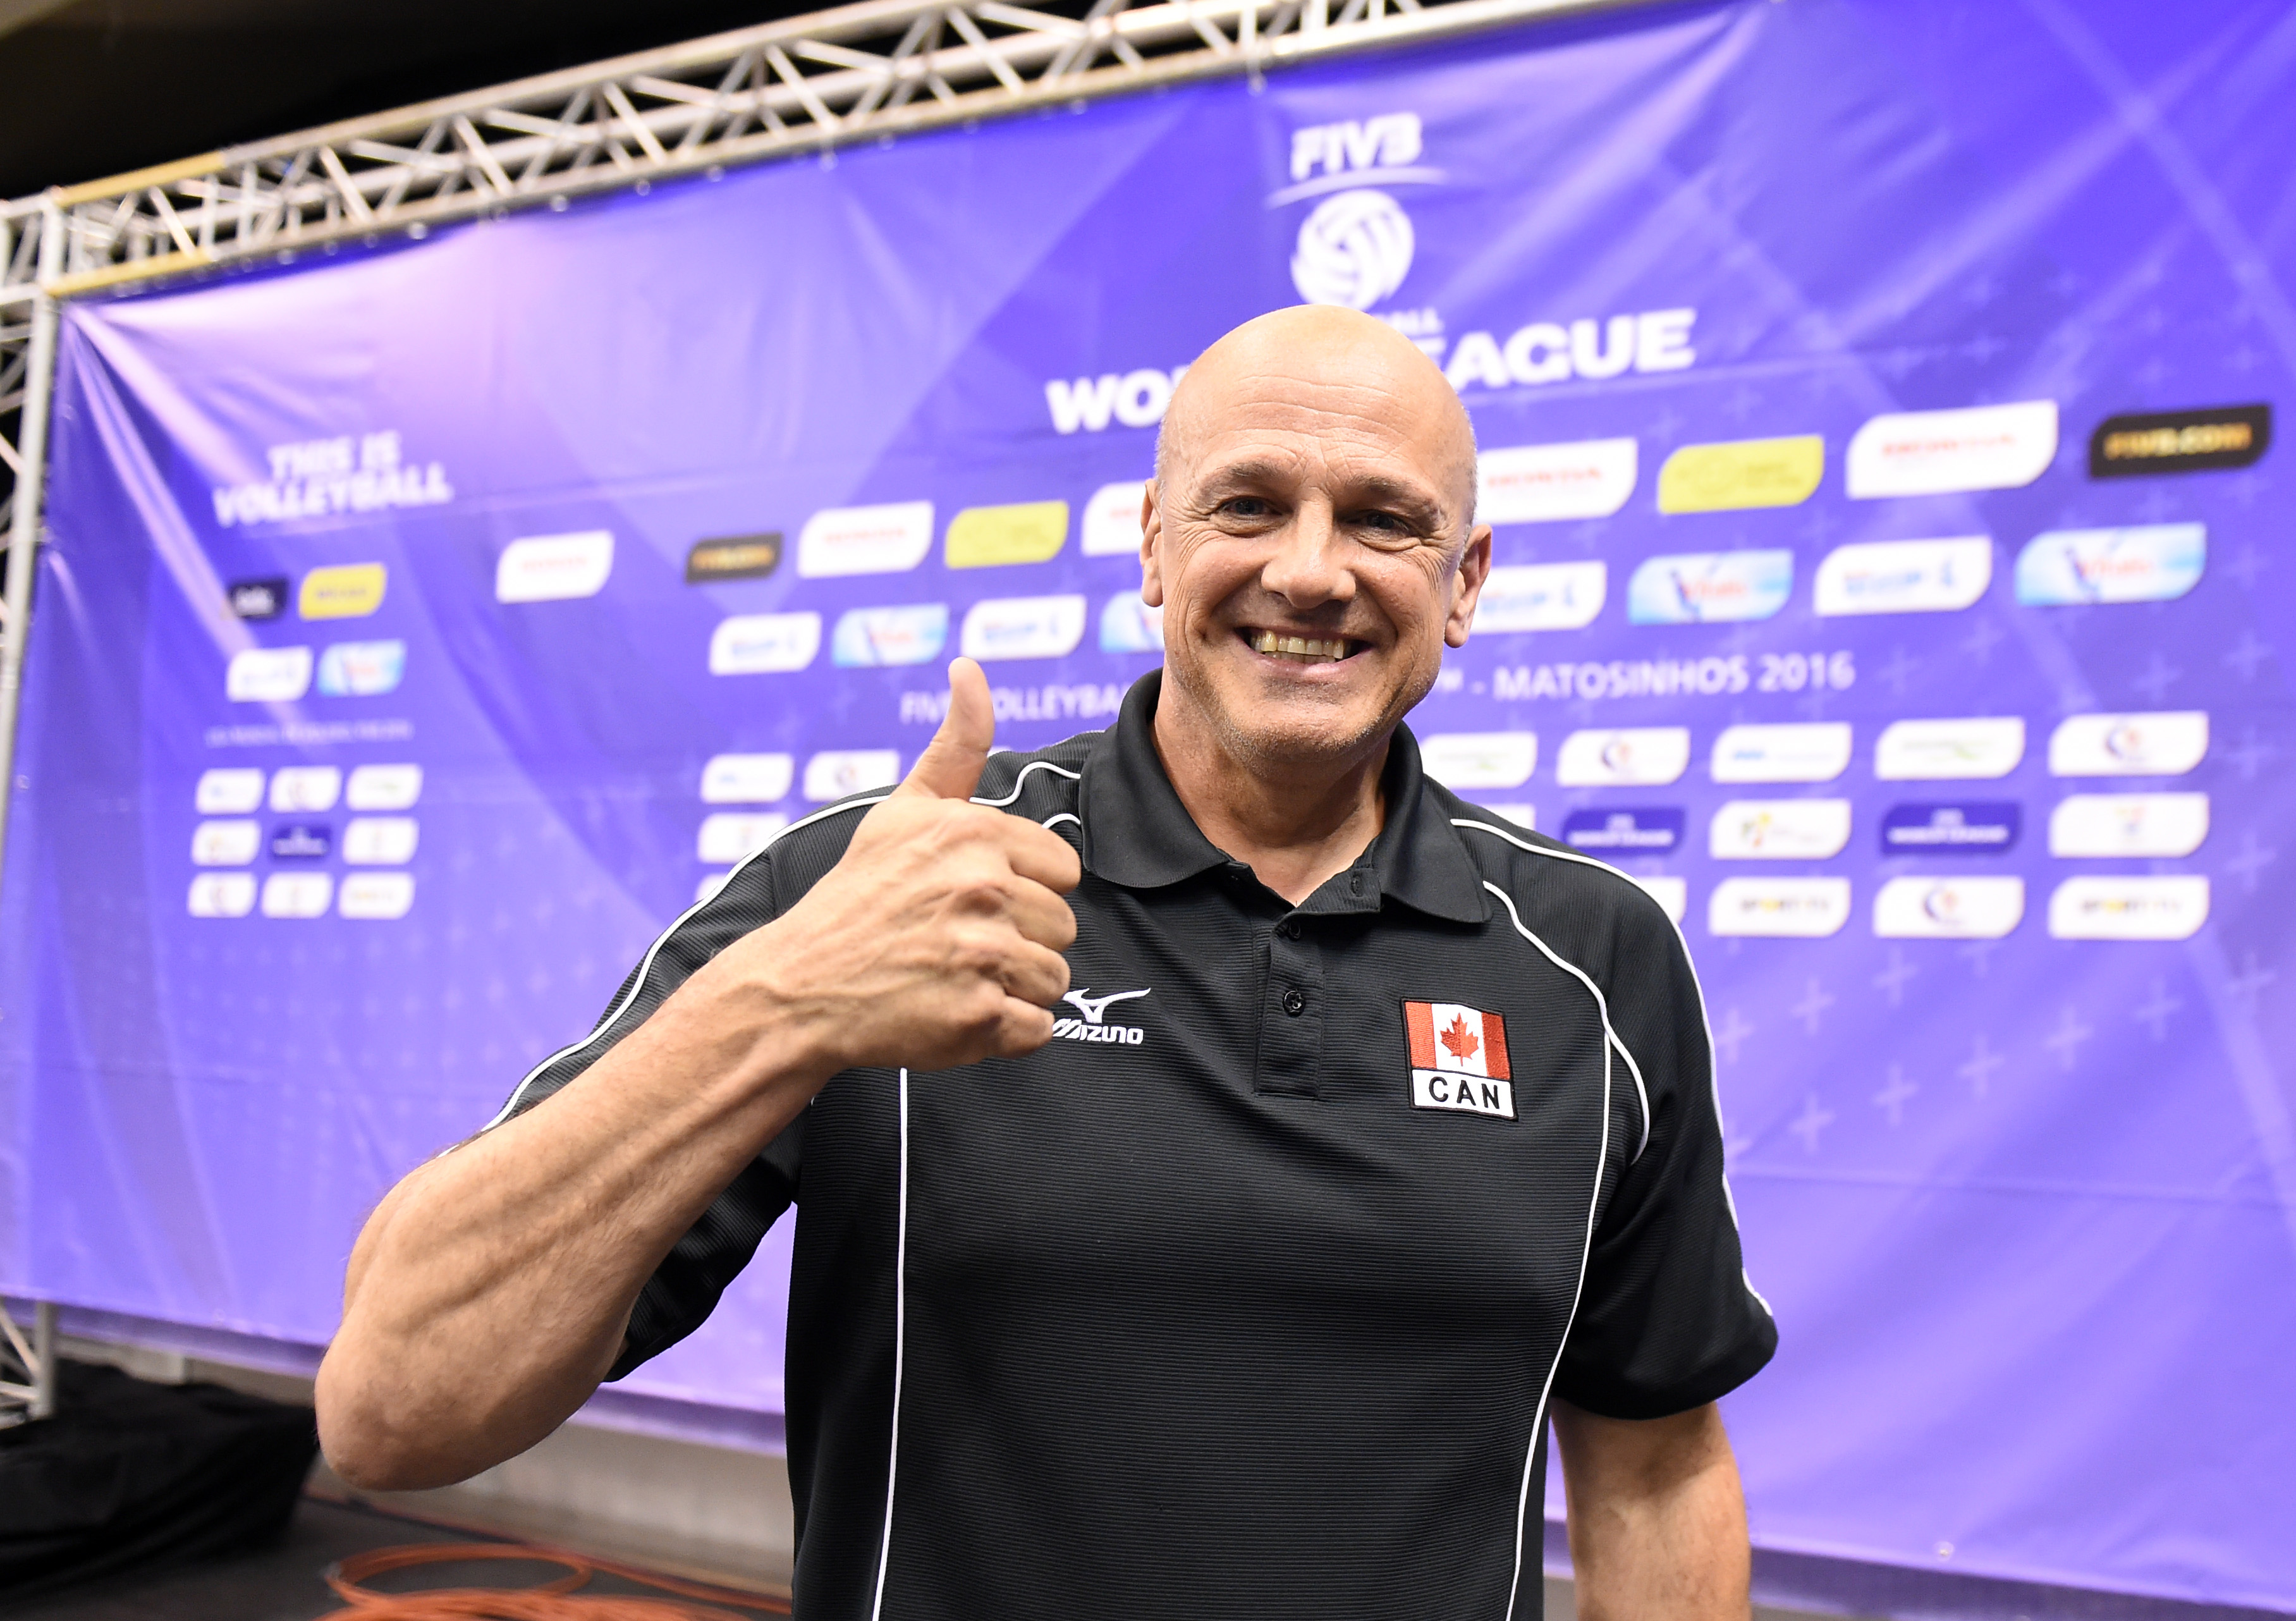 Canada coach Glenn Hoag at the mix zone after the match against Canada